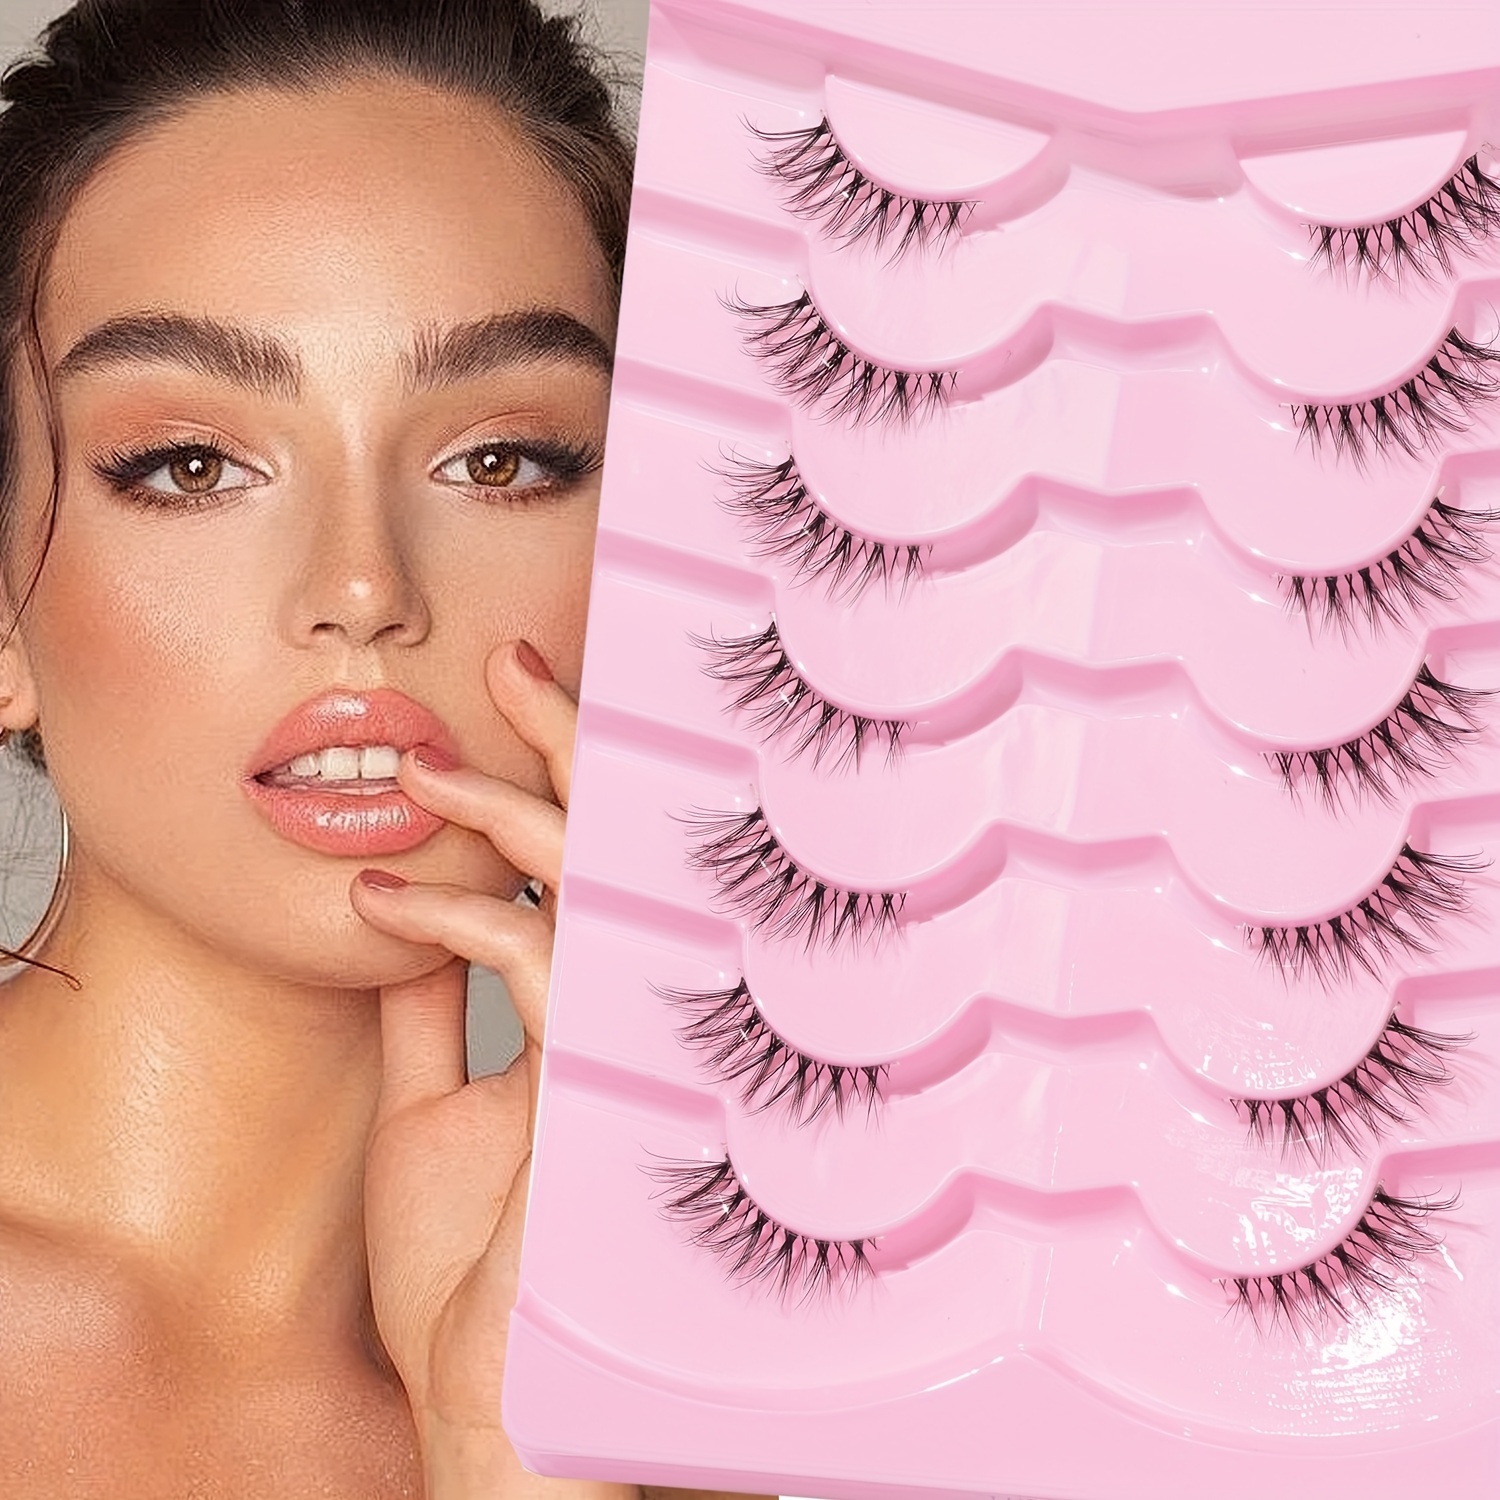 

7-pair Set Natural Look Half-eye False Eyelashes, Diy Easy-to-apply Segmented Design, Hypoallergenic Transparent Band, Soft & Fluffy 3d Effect, Premium Faux Lashes For A Refined Look - Phy-2404